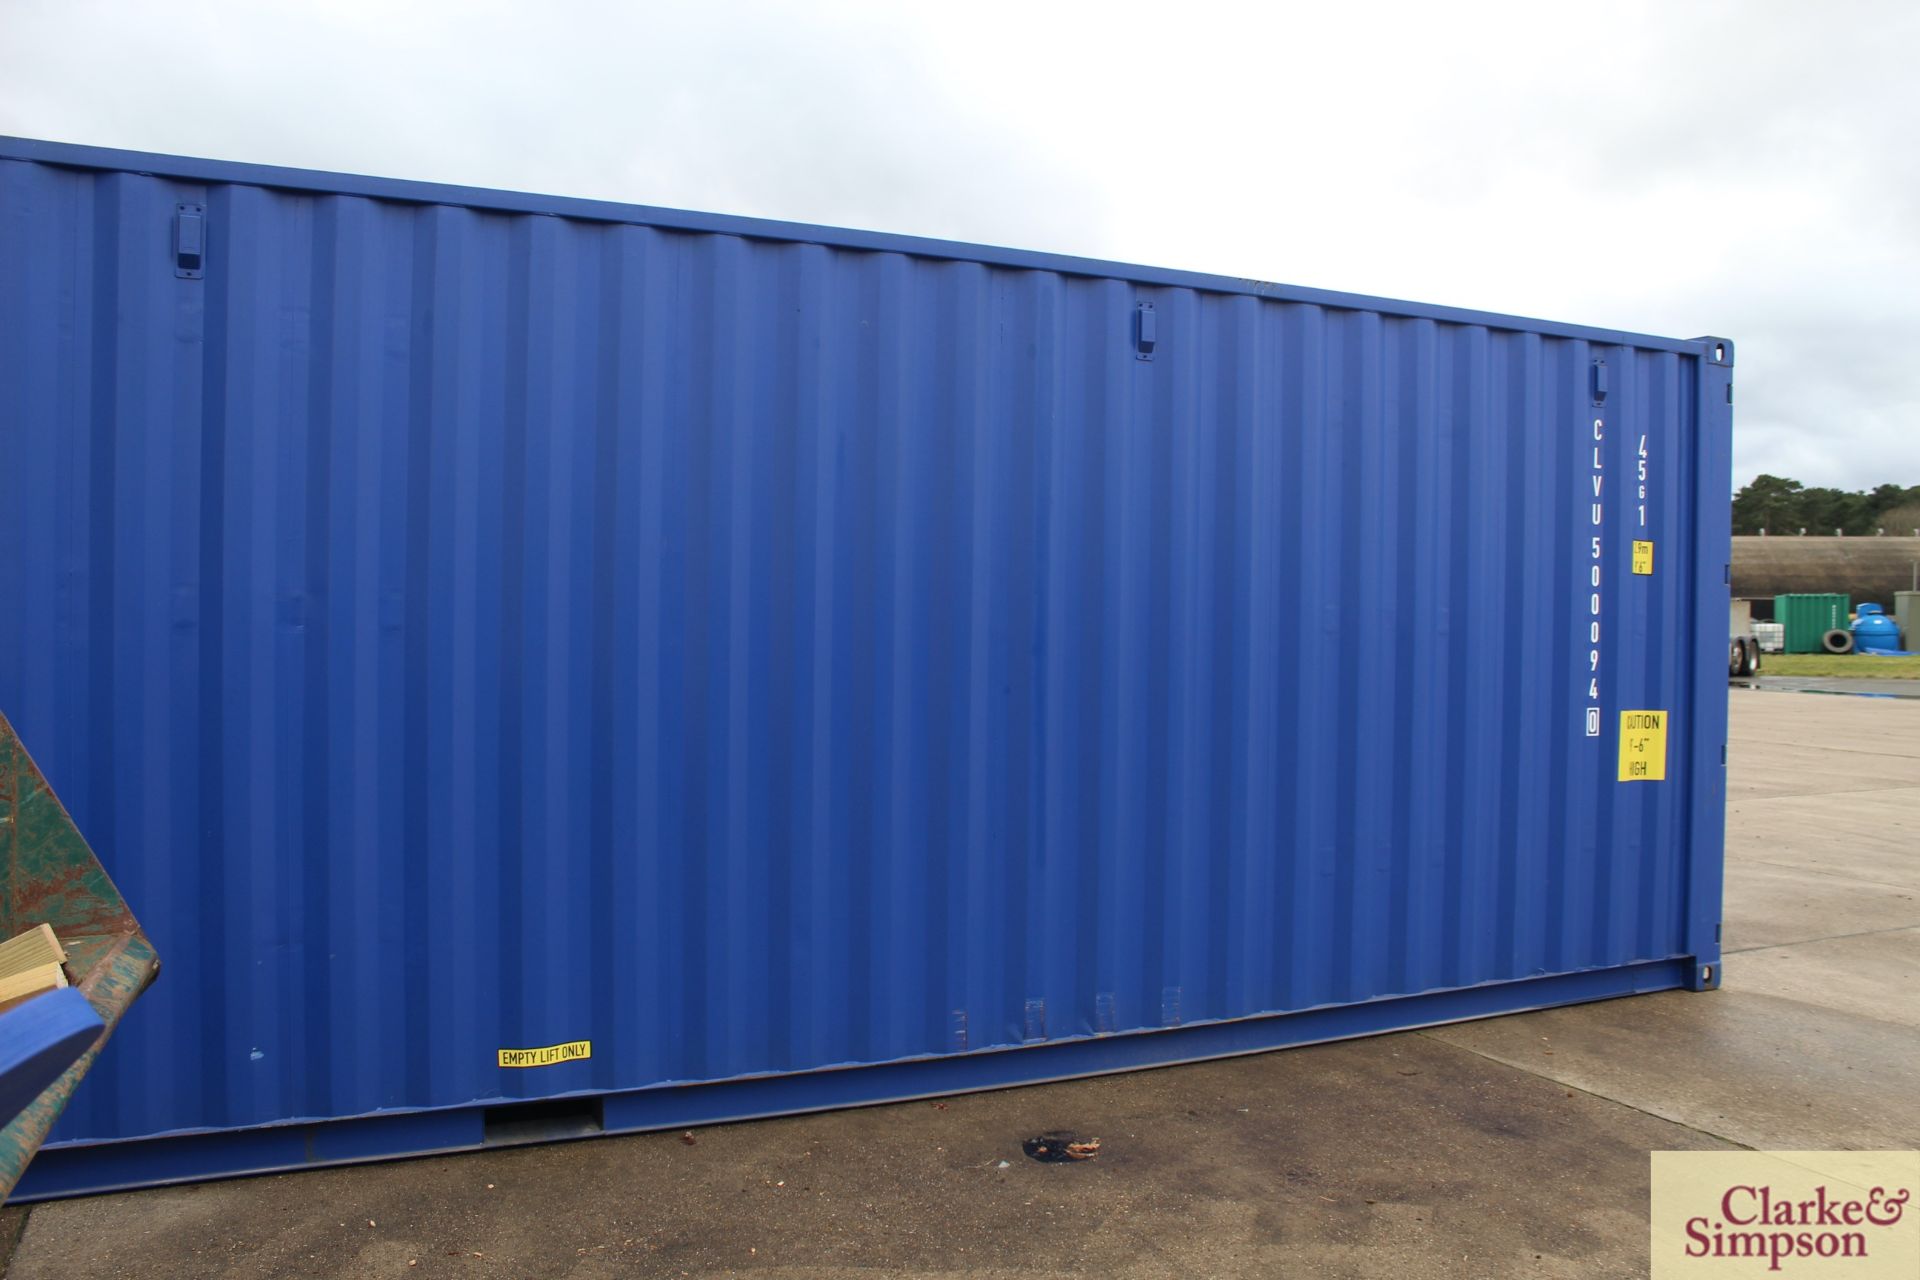 40ft x 9ft6in high shipping container. 2019. Heavily reinforced to interior to include plates - Image 3 of 16